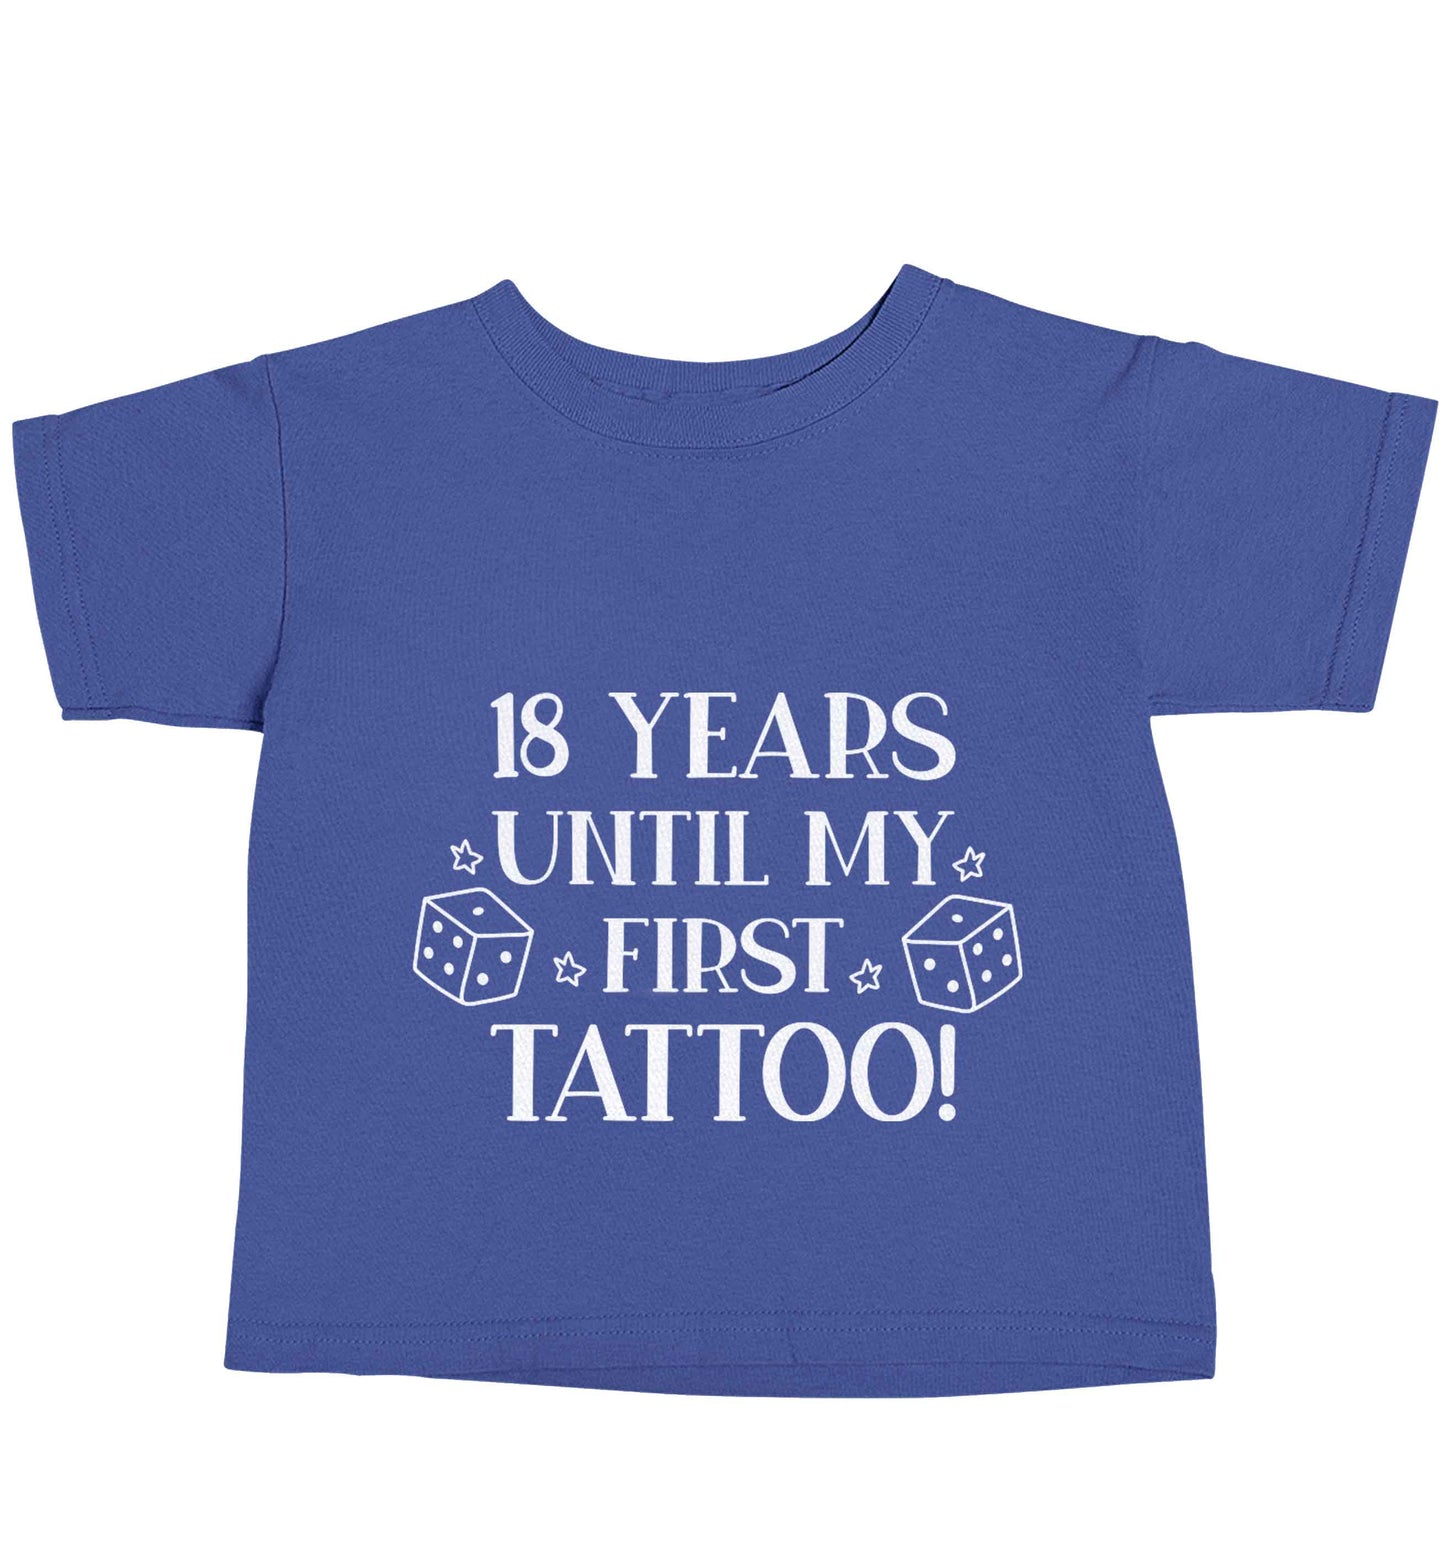 18 Years Until my First Tattoo blue baby toddler Tshirt 2 Years